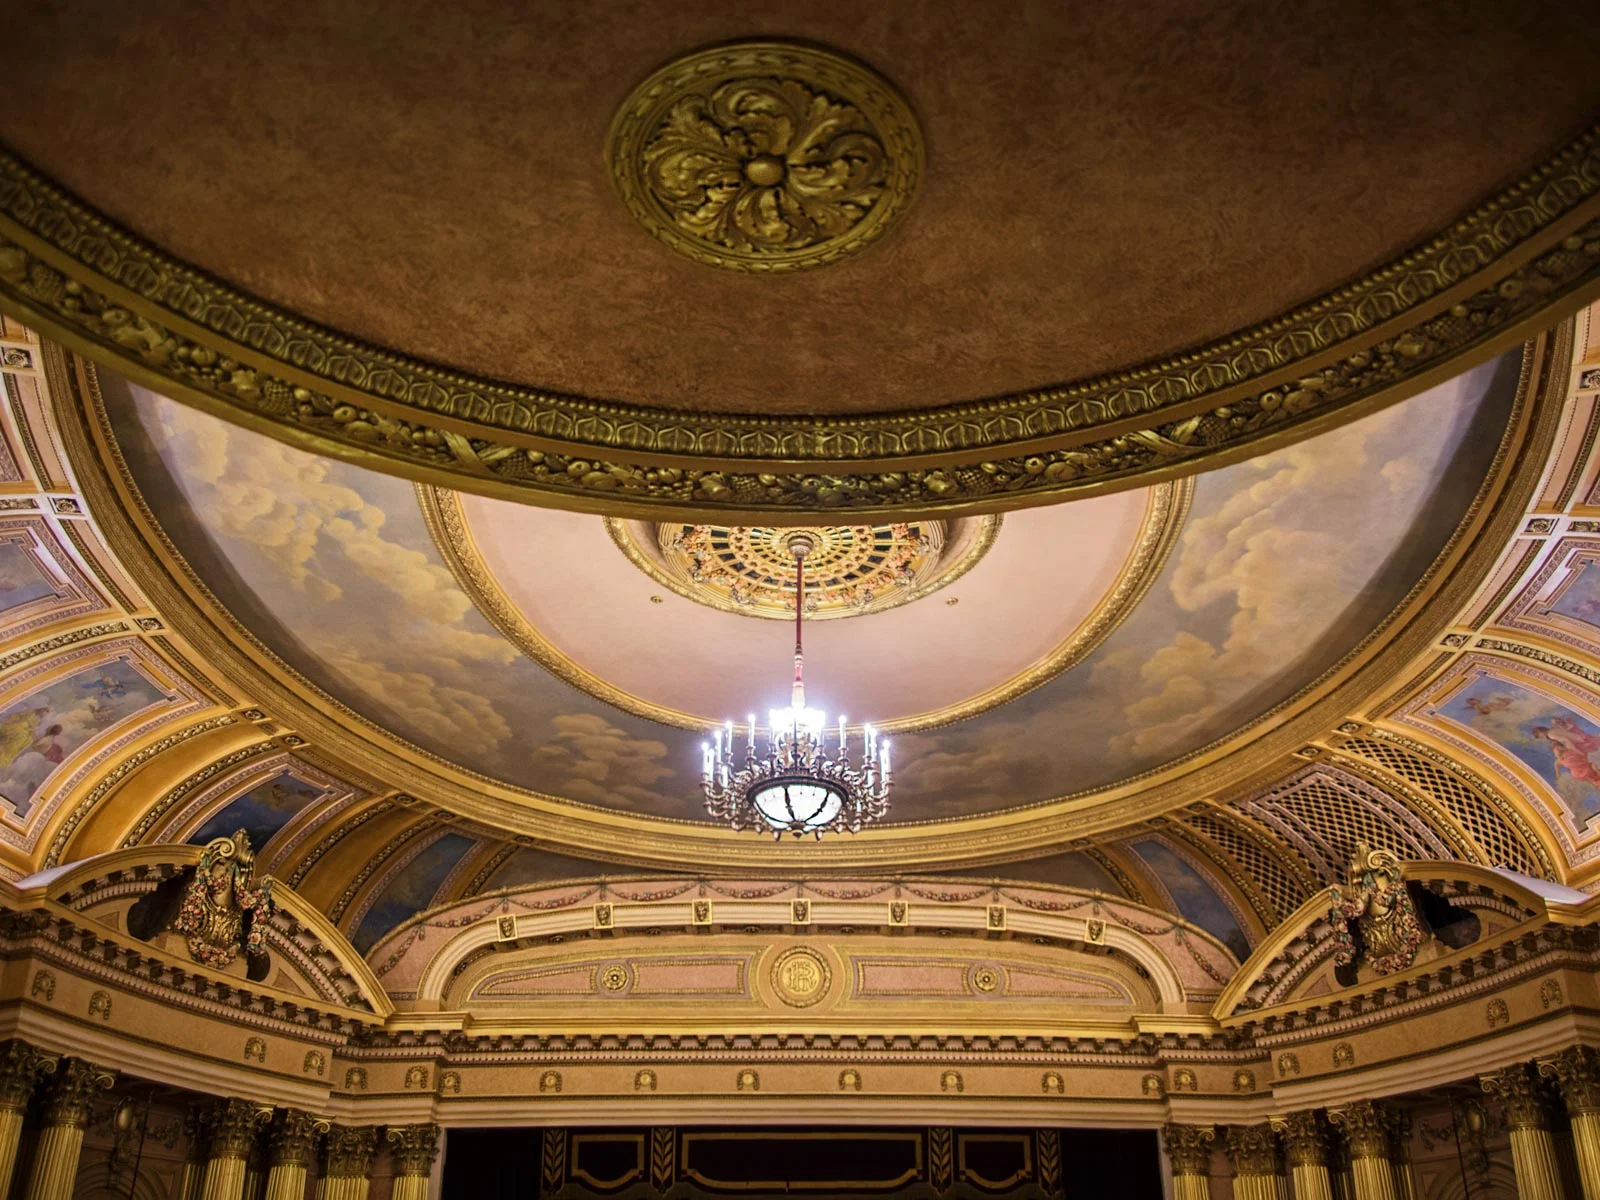 Al Ringling theater ceiling details